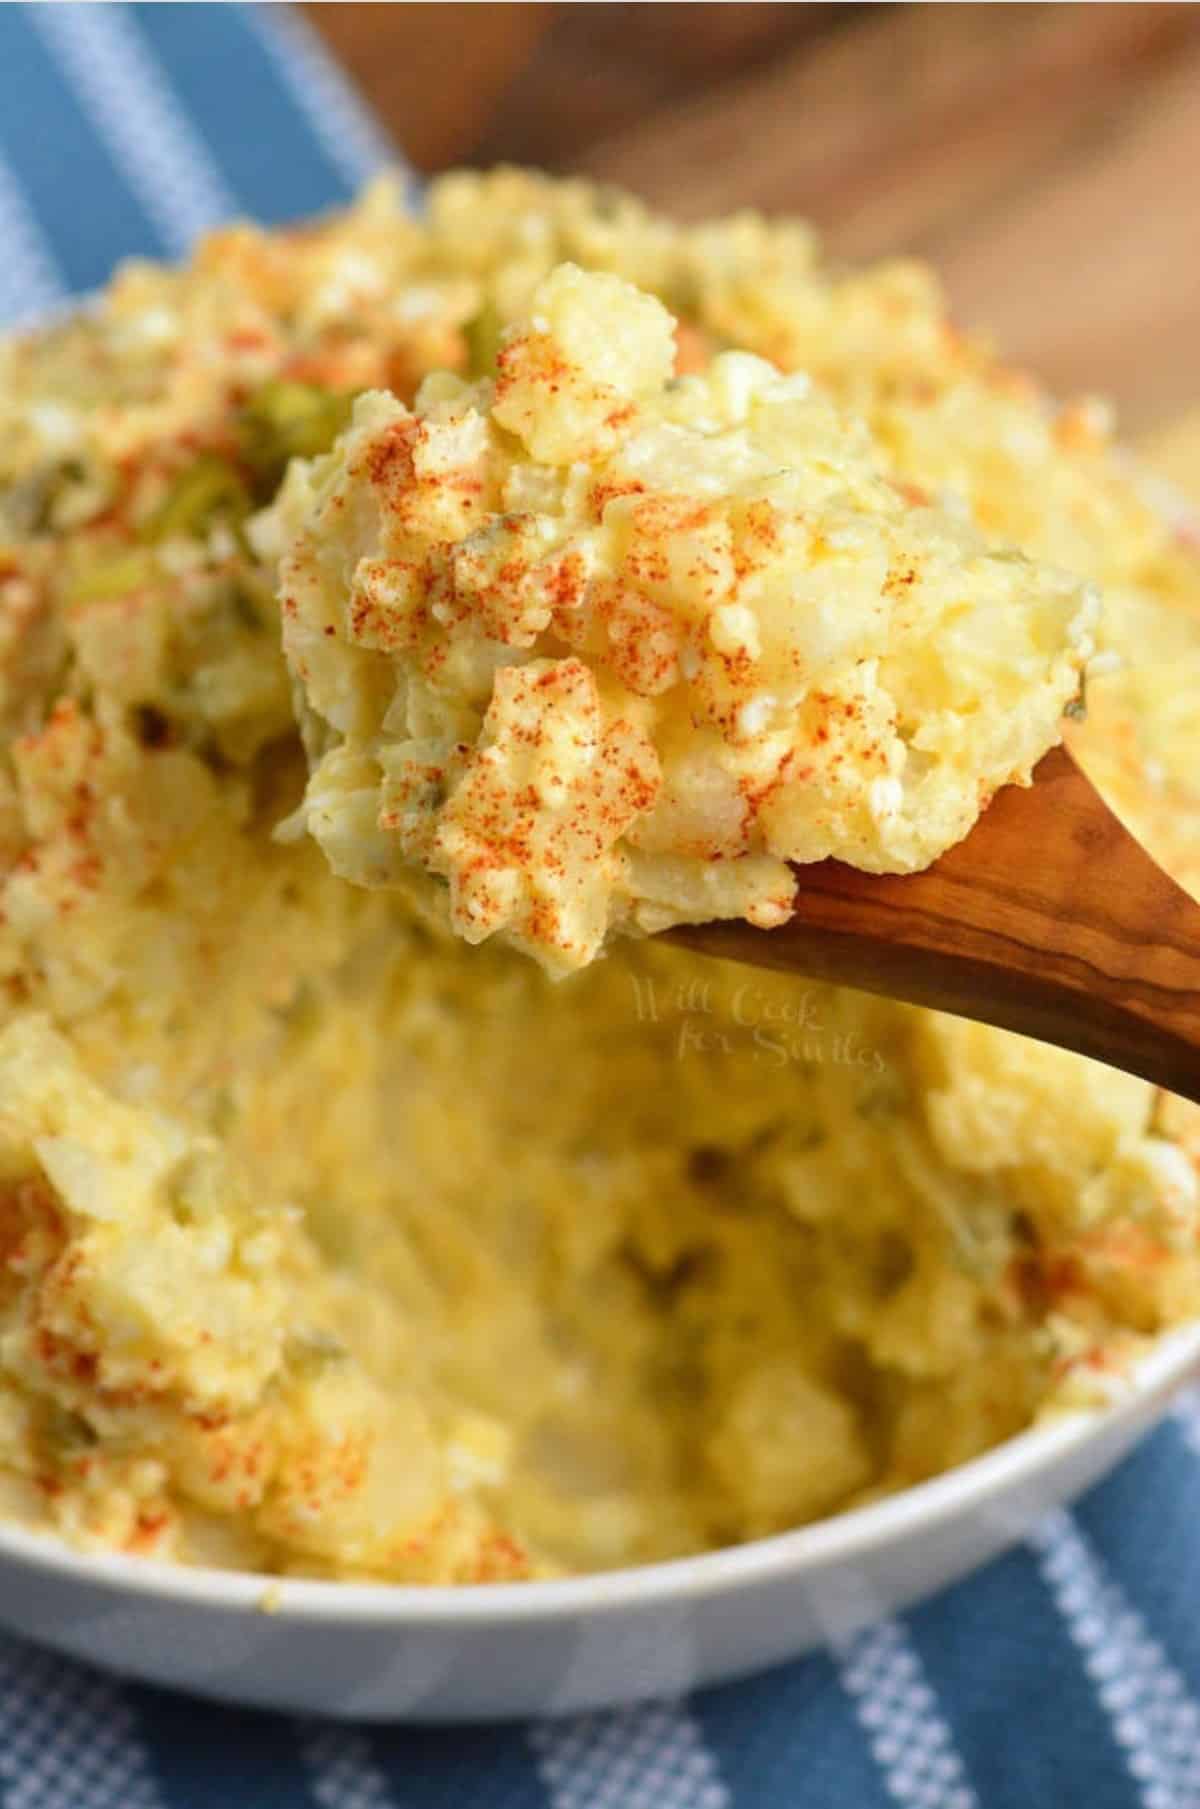 scooping southern potato salad with a wooden spoon out of the bowl.